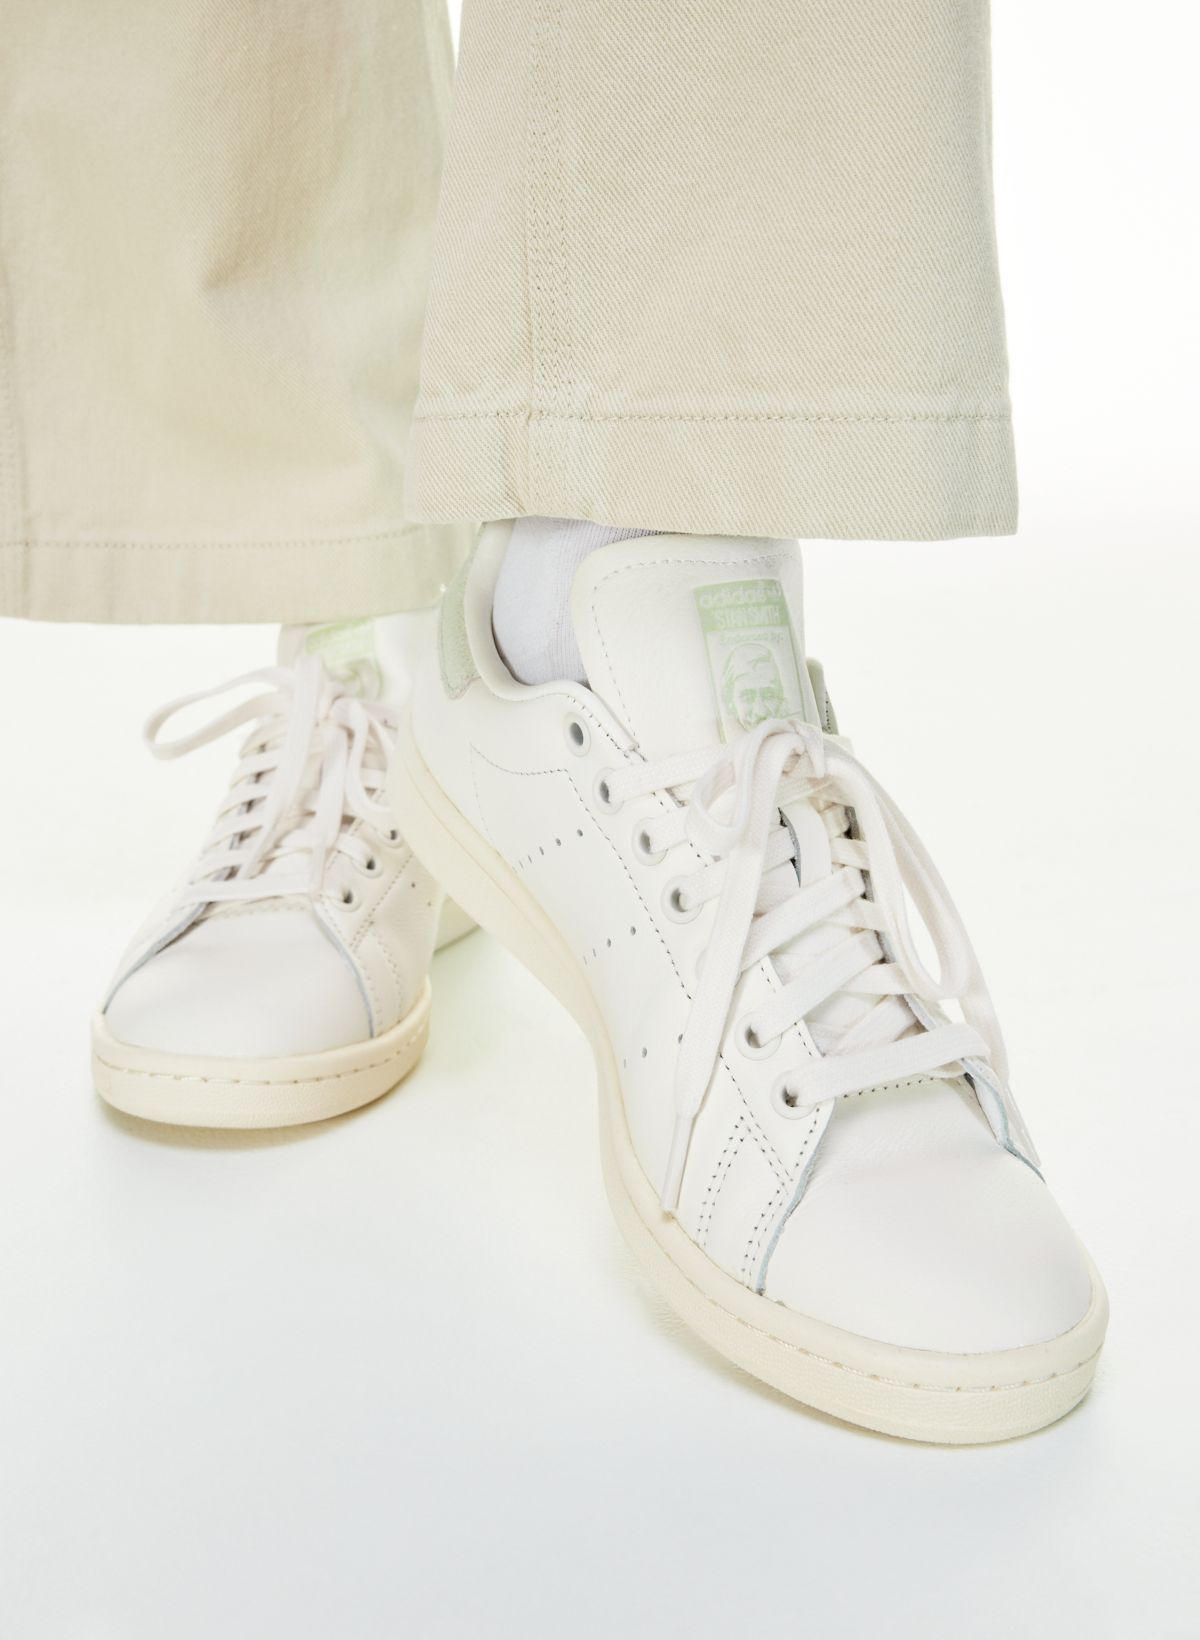 adidas Stan Smith Leather Sock Pack  Adidas stan smith, Leather socks,  Adidas originals stan smith